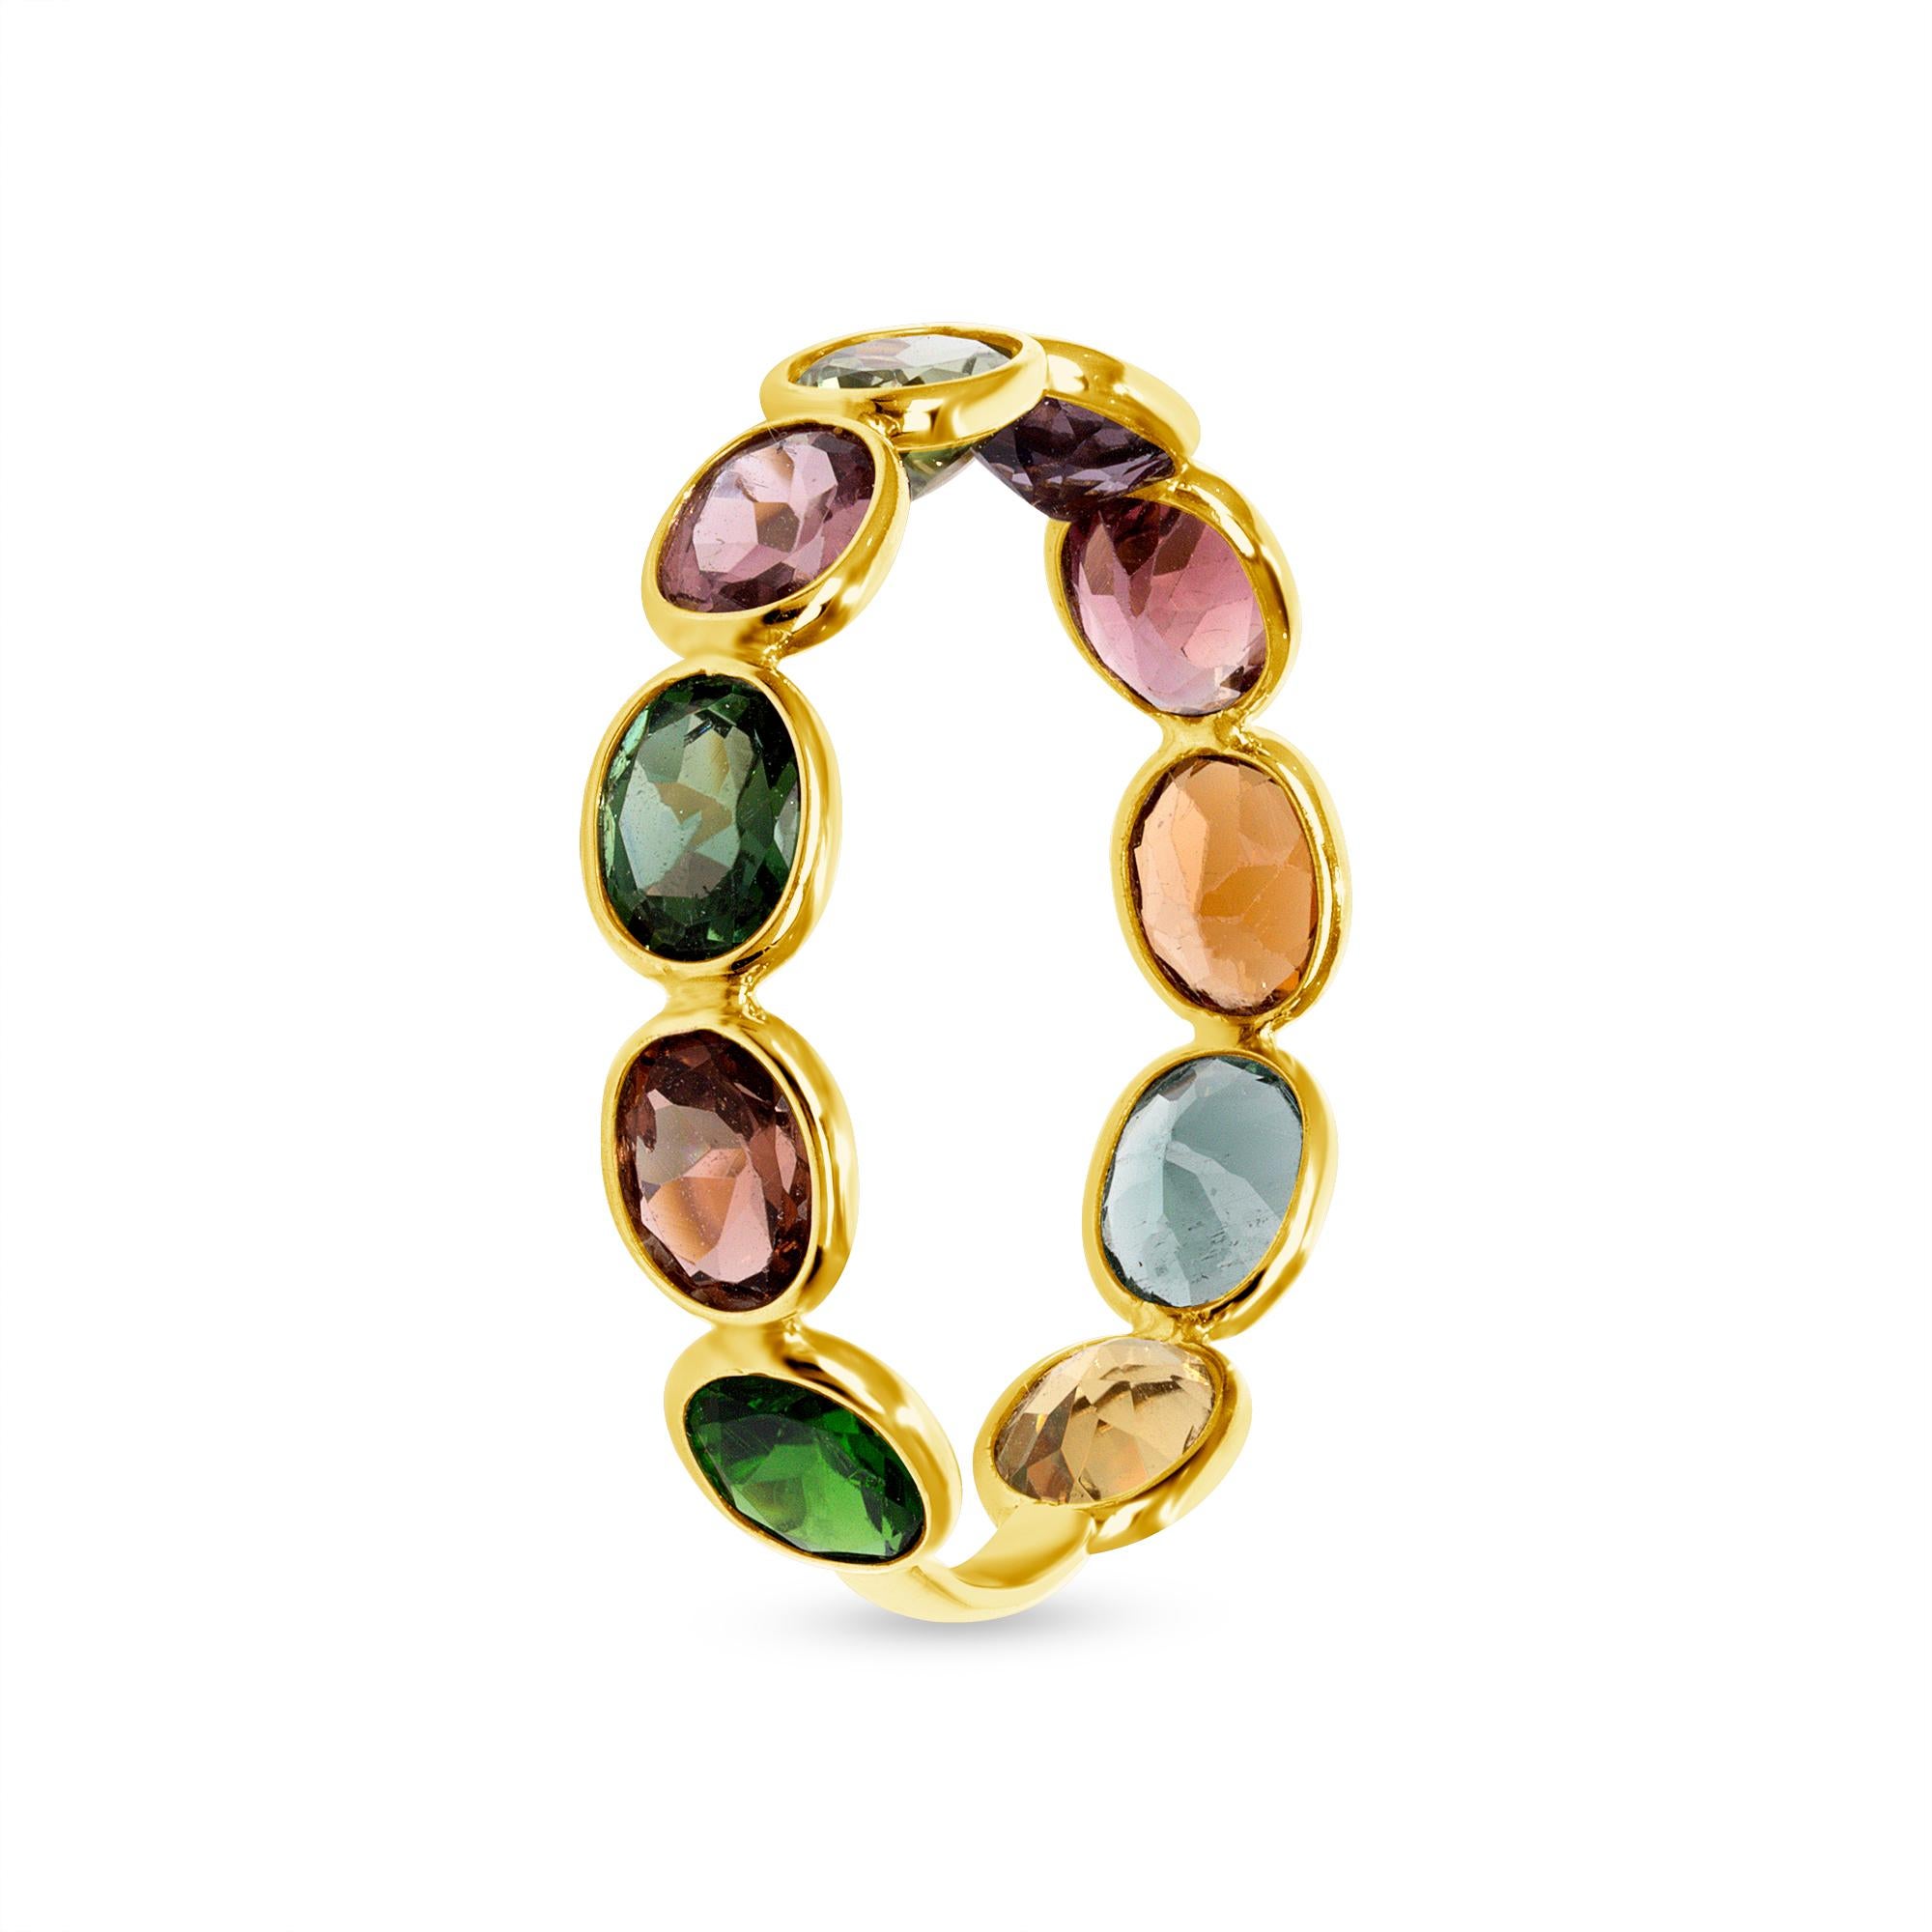 Designed by award-winning artist Brenda Smith, this band ring is made with faceted natural multicolor sapphires with a carat total weight of 3.56 and 18-karat yellow gold. It is in stock and available in sizes 5 through 7. This ring is colorful but